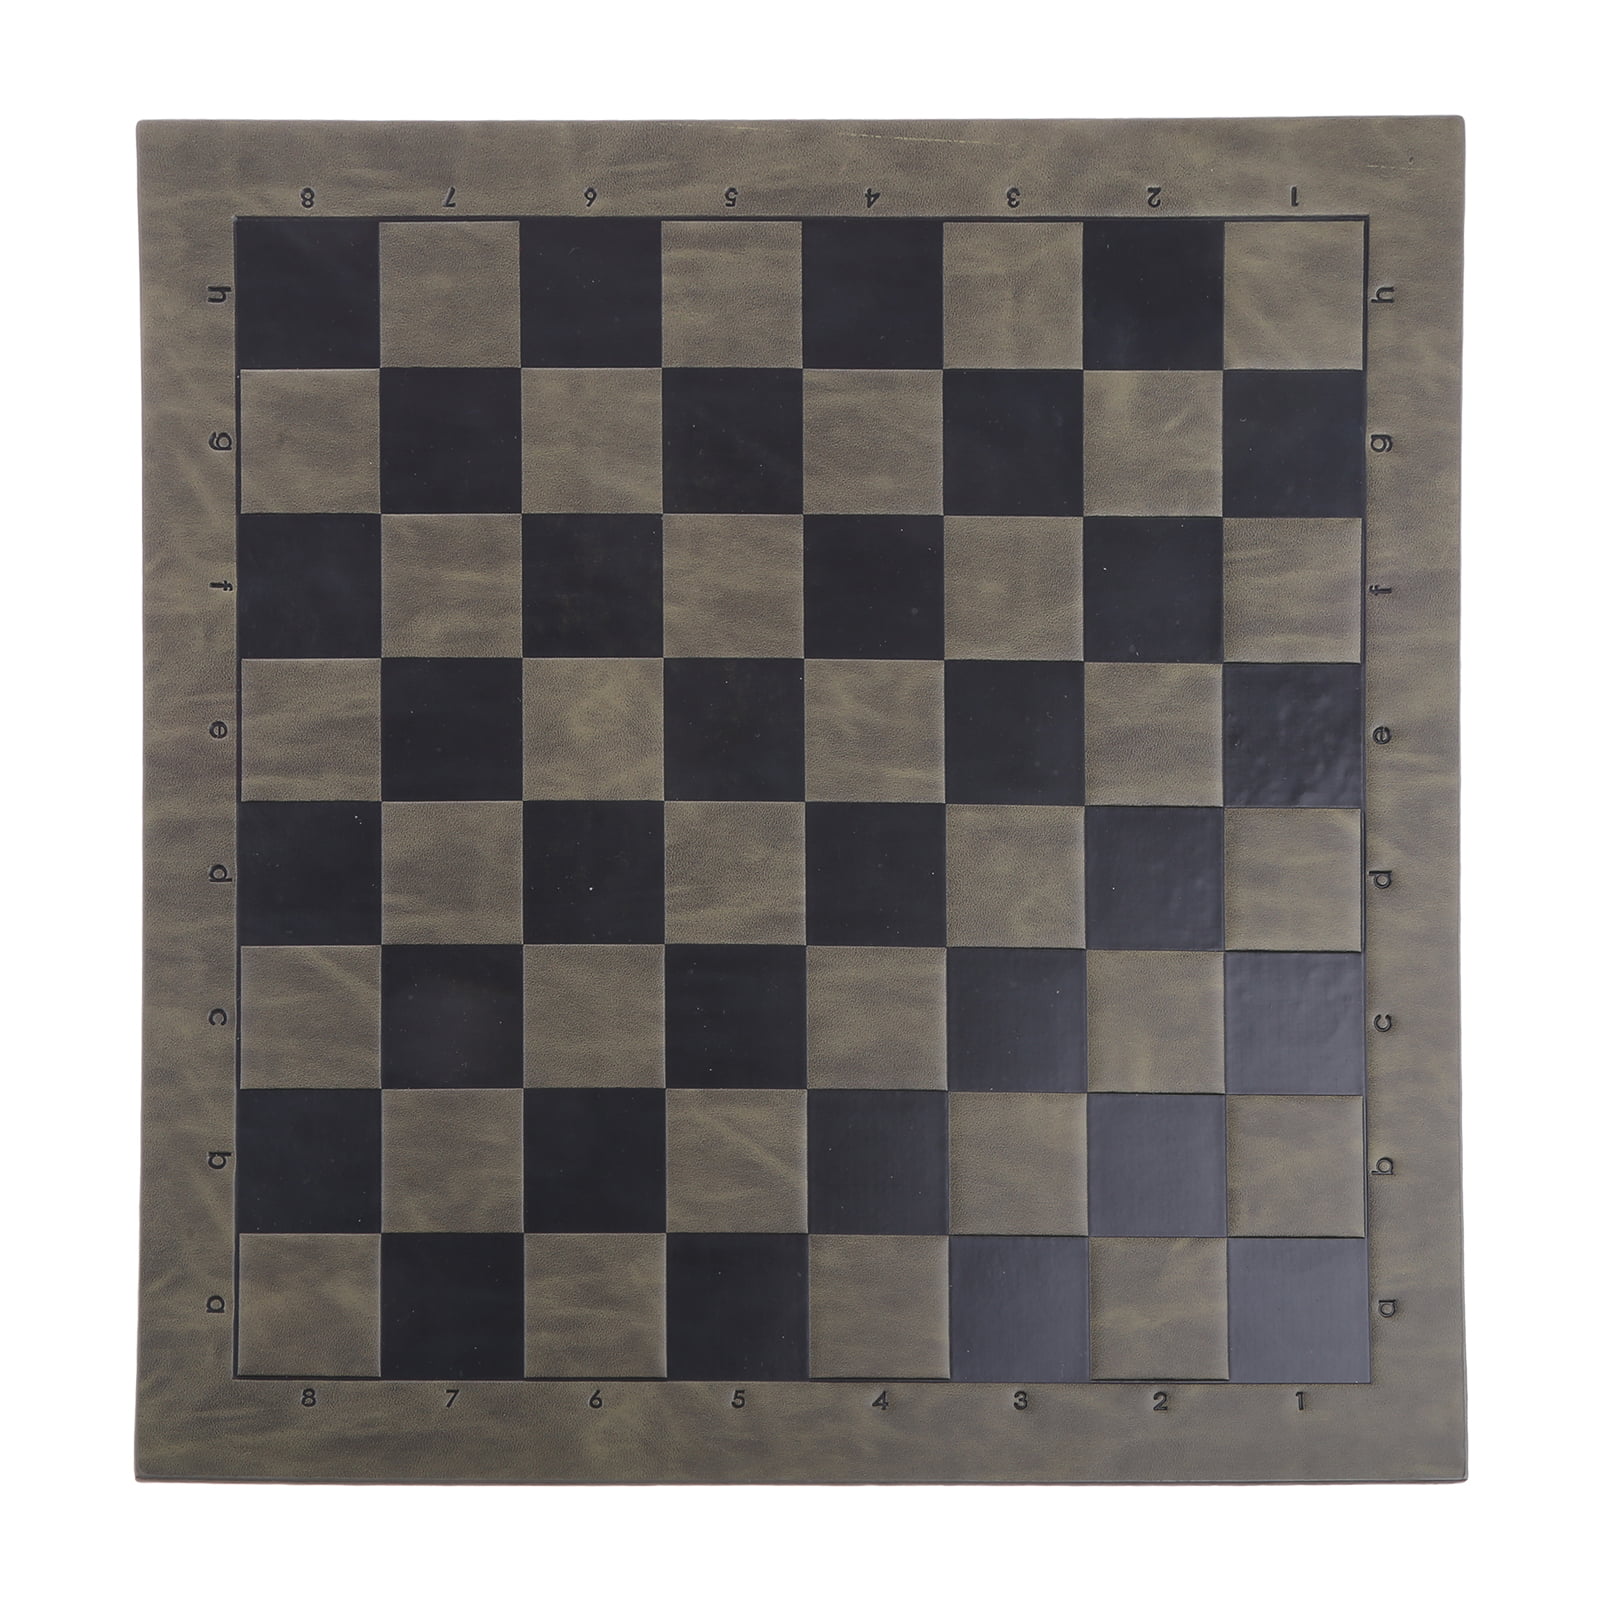 Play Pad Chess Board Unique Design Embossed Pattern Leather Game Mat Chessboard 